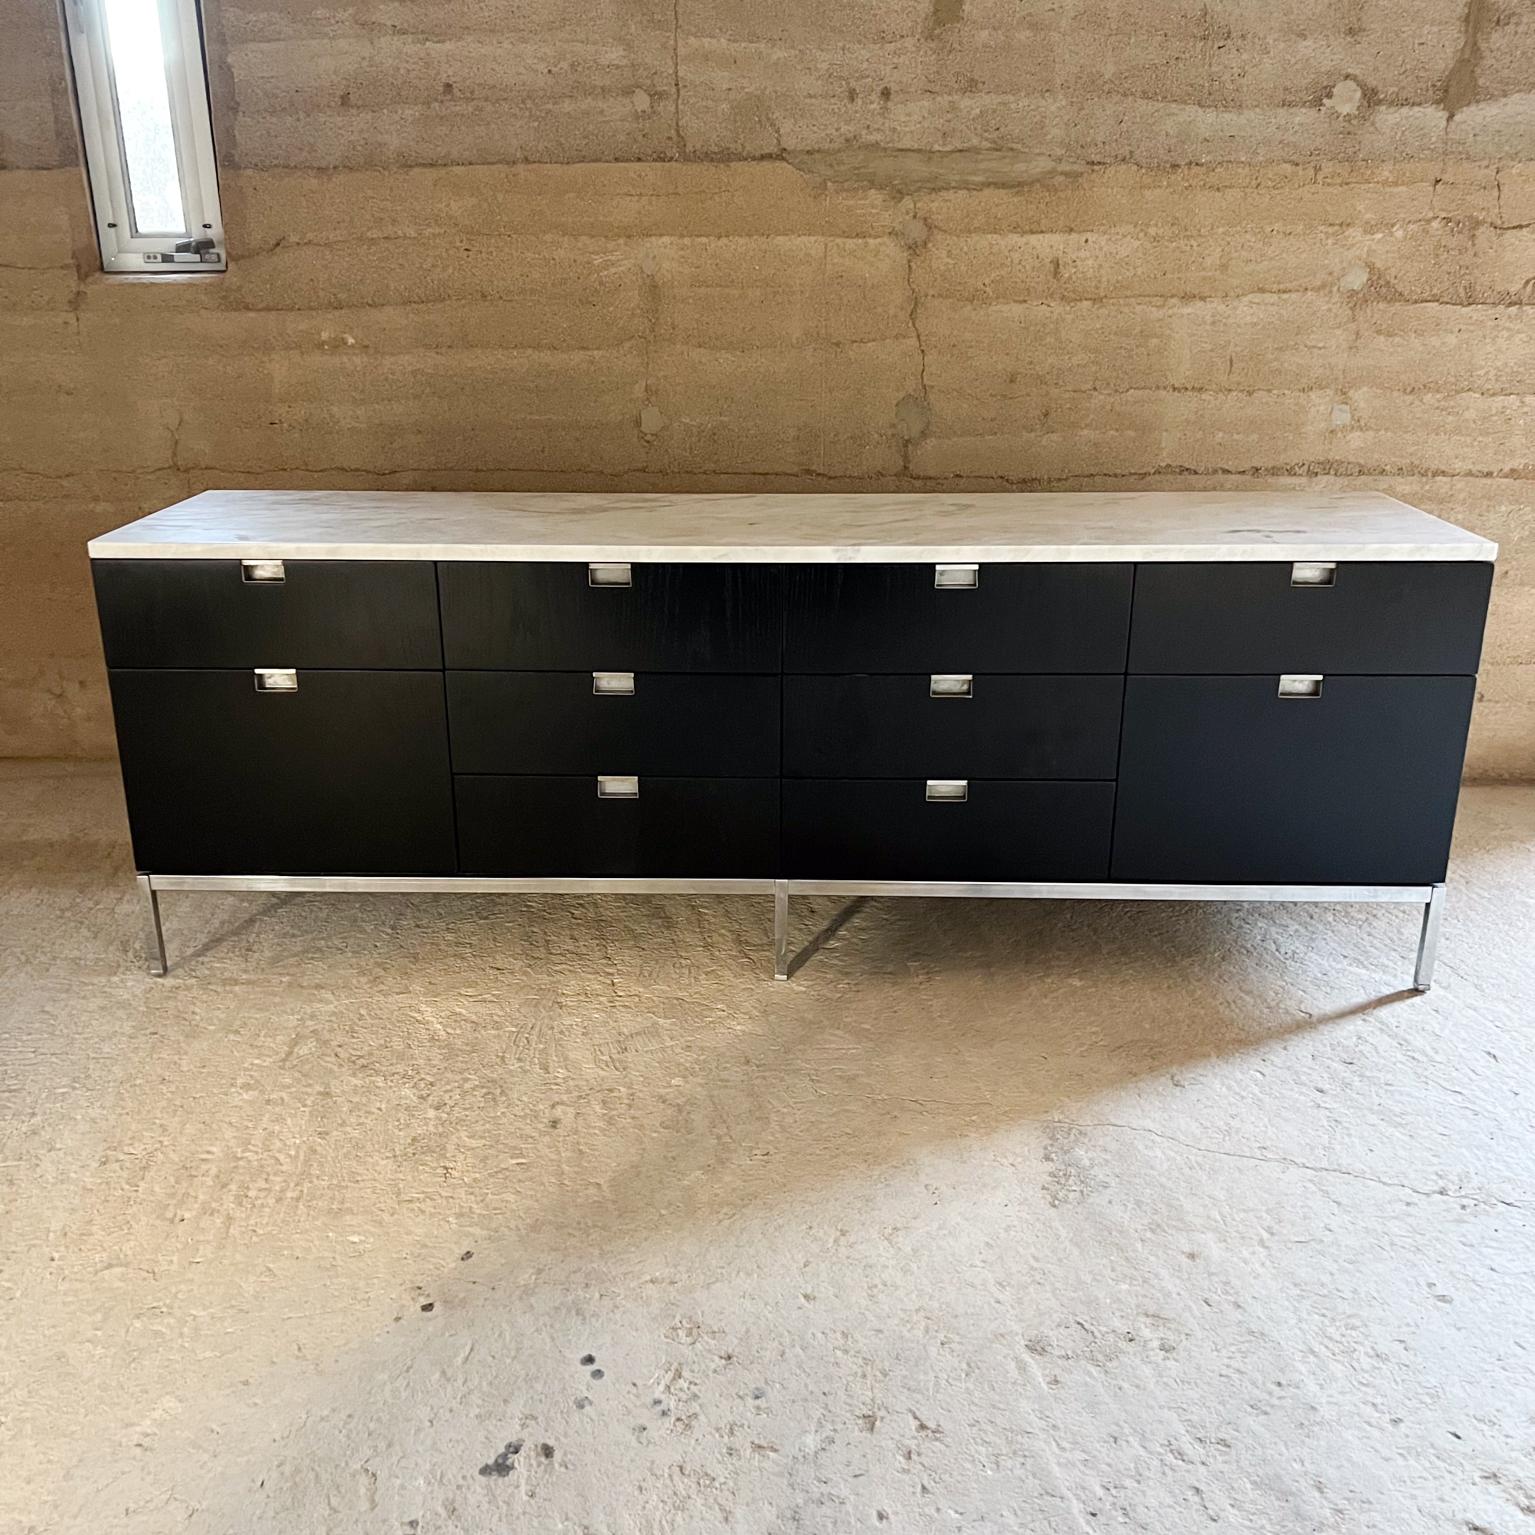 1960s Knoll Credenza Florence Knoll design
no label
Marble Chrome Ebonized Wood
26 h x 18 d x 74.63
Preowned vintage condition
Refer to images provided.
Delivery to SF LA OC Palm Springs